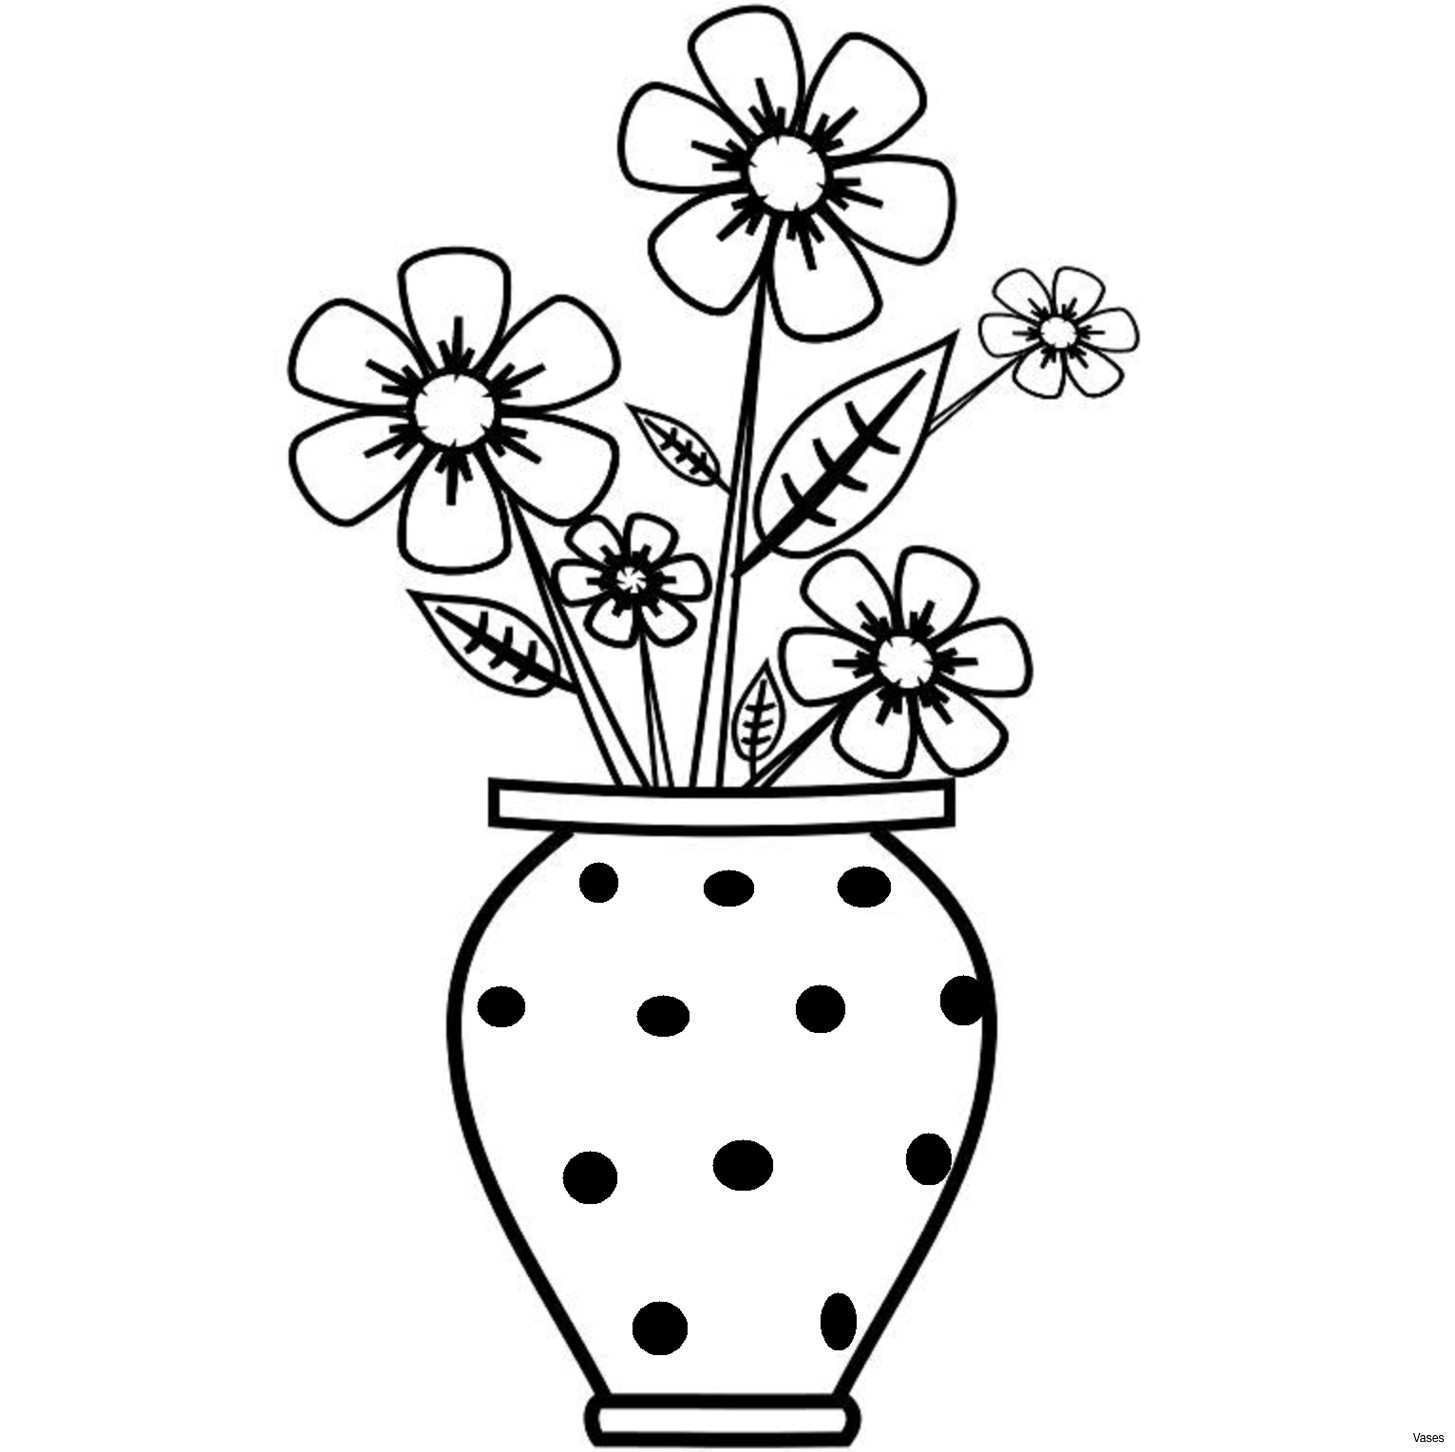 30 Famous Gray Floor Vase 2024 free download gray floor vase of black and white art inspirational will clipart colored flower vase pertaining to black and white art inspirational will clipart colored flower vase clip arth vases art inf